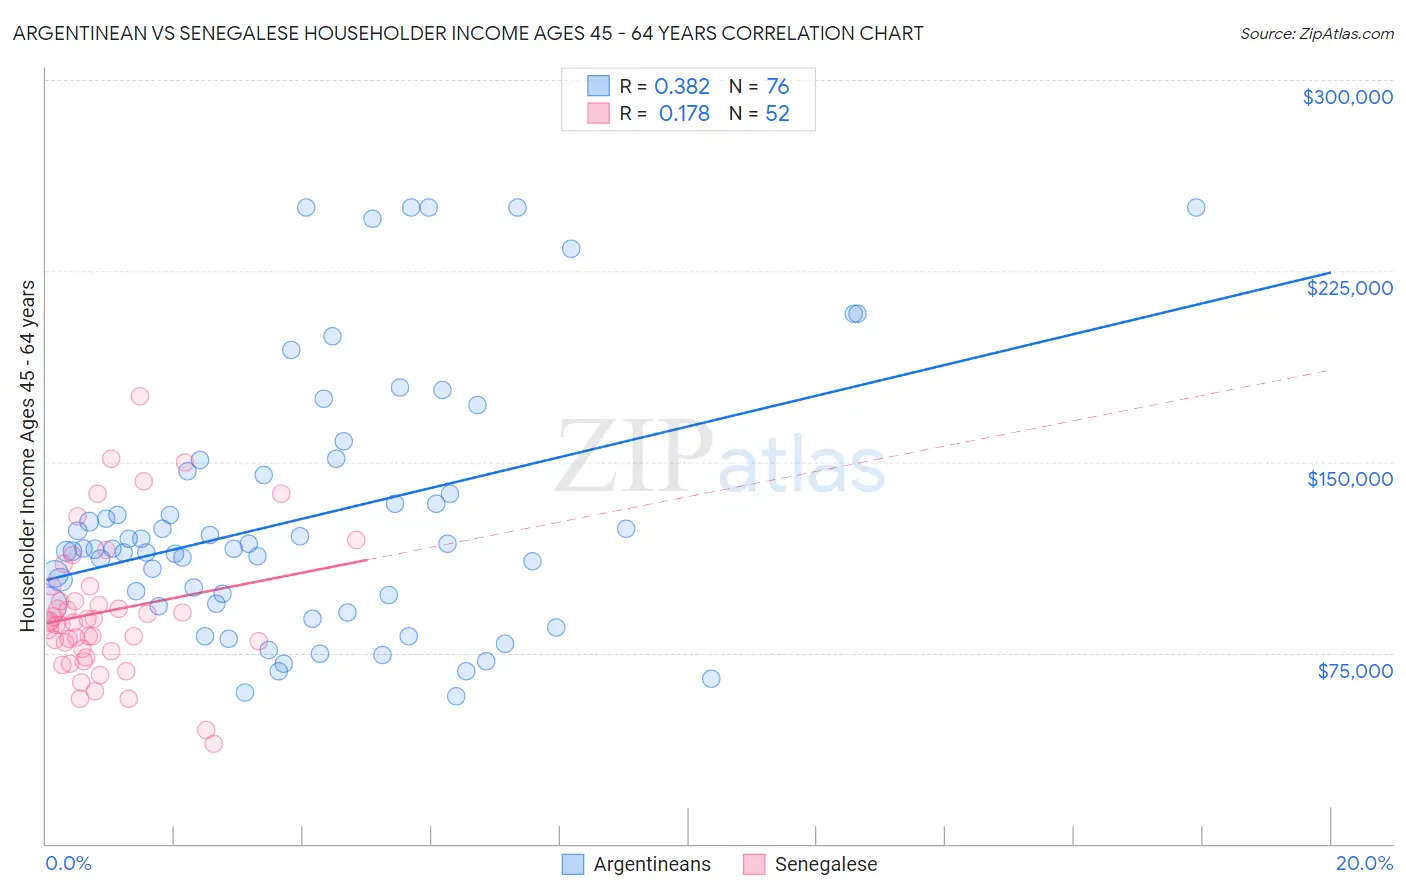 Argentinean vs Senegalese Householder Income Ages 45 - 64 years